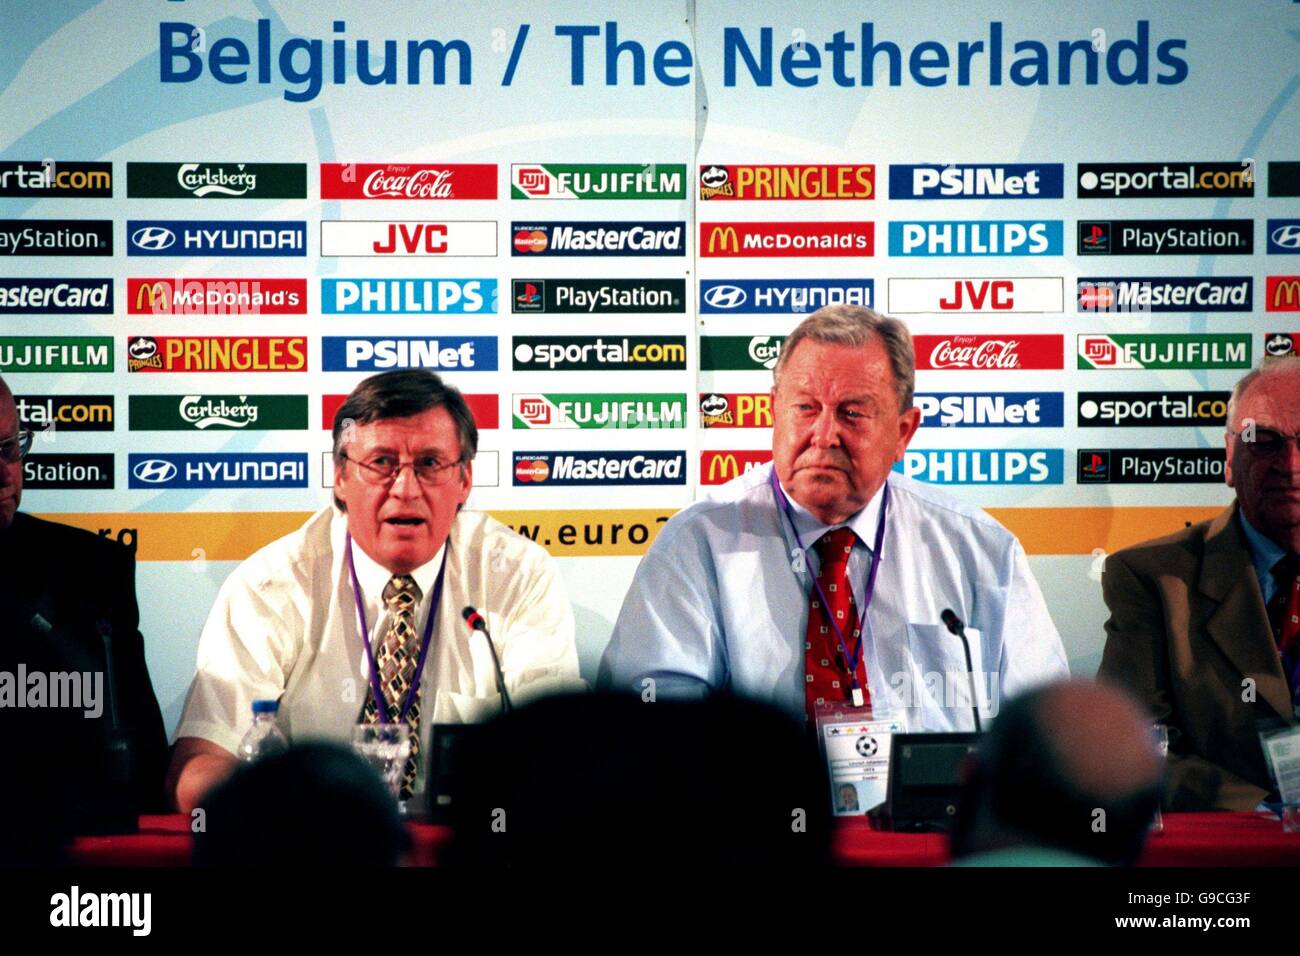 UEFA's Chief Executive Gerhard Aigner (L) and UEFA President Lennart Johansson (R) discuss their stance on the English football hooligans at a press conference at Liege this evening Stock Photo